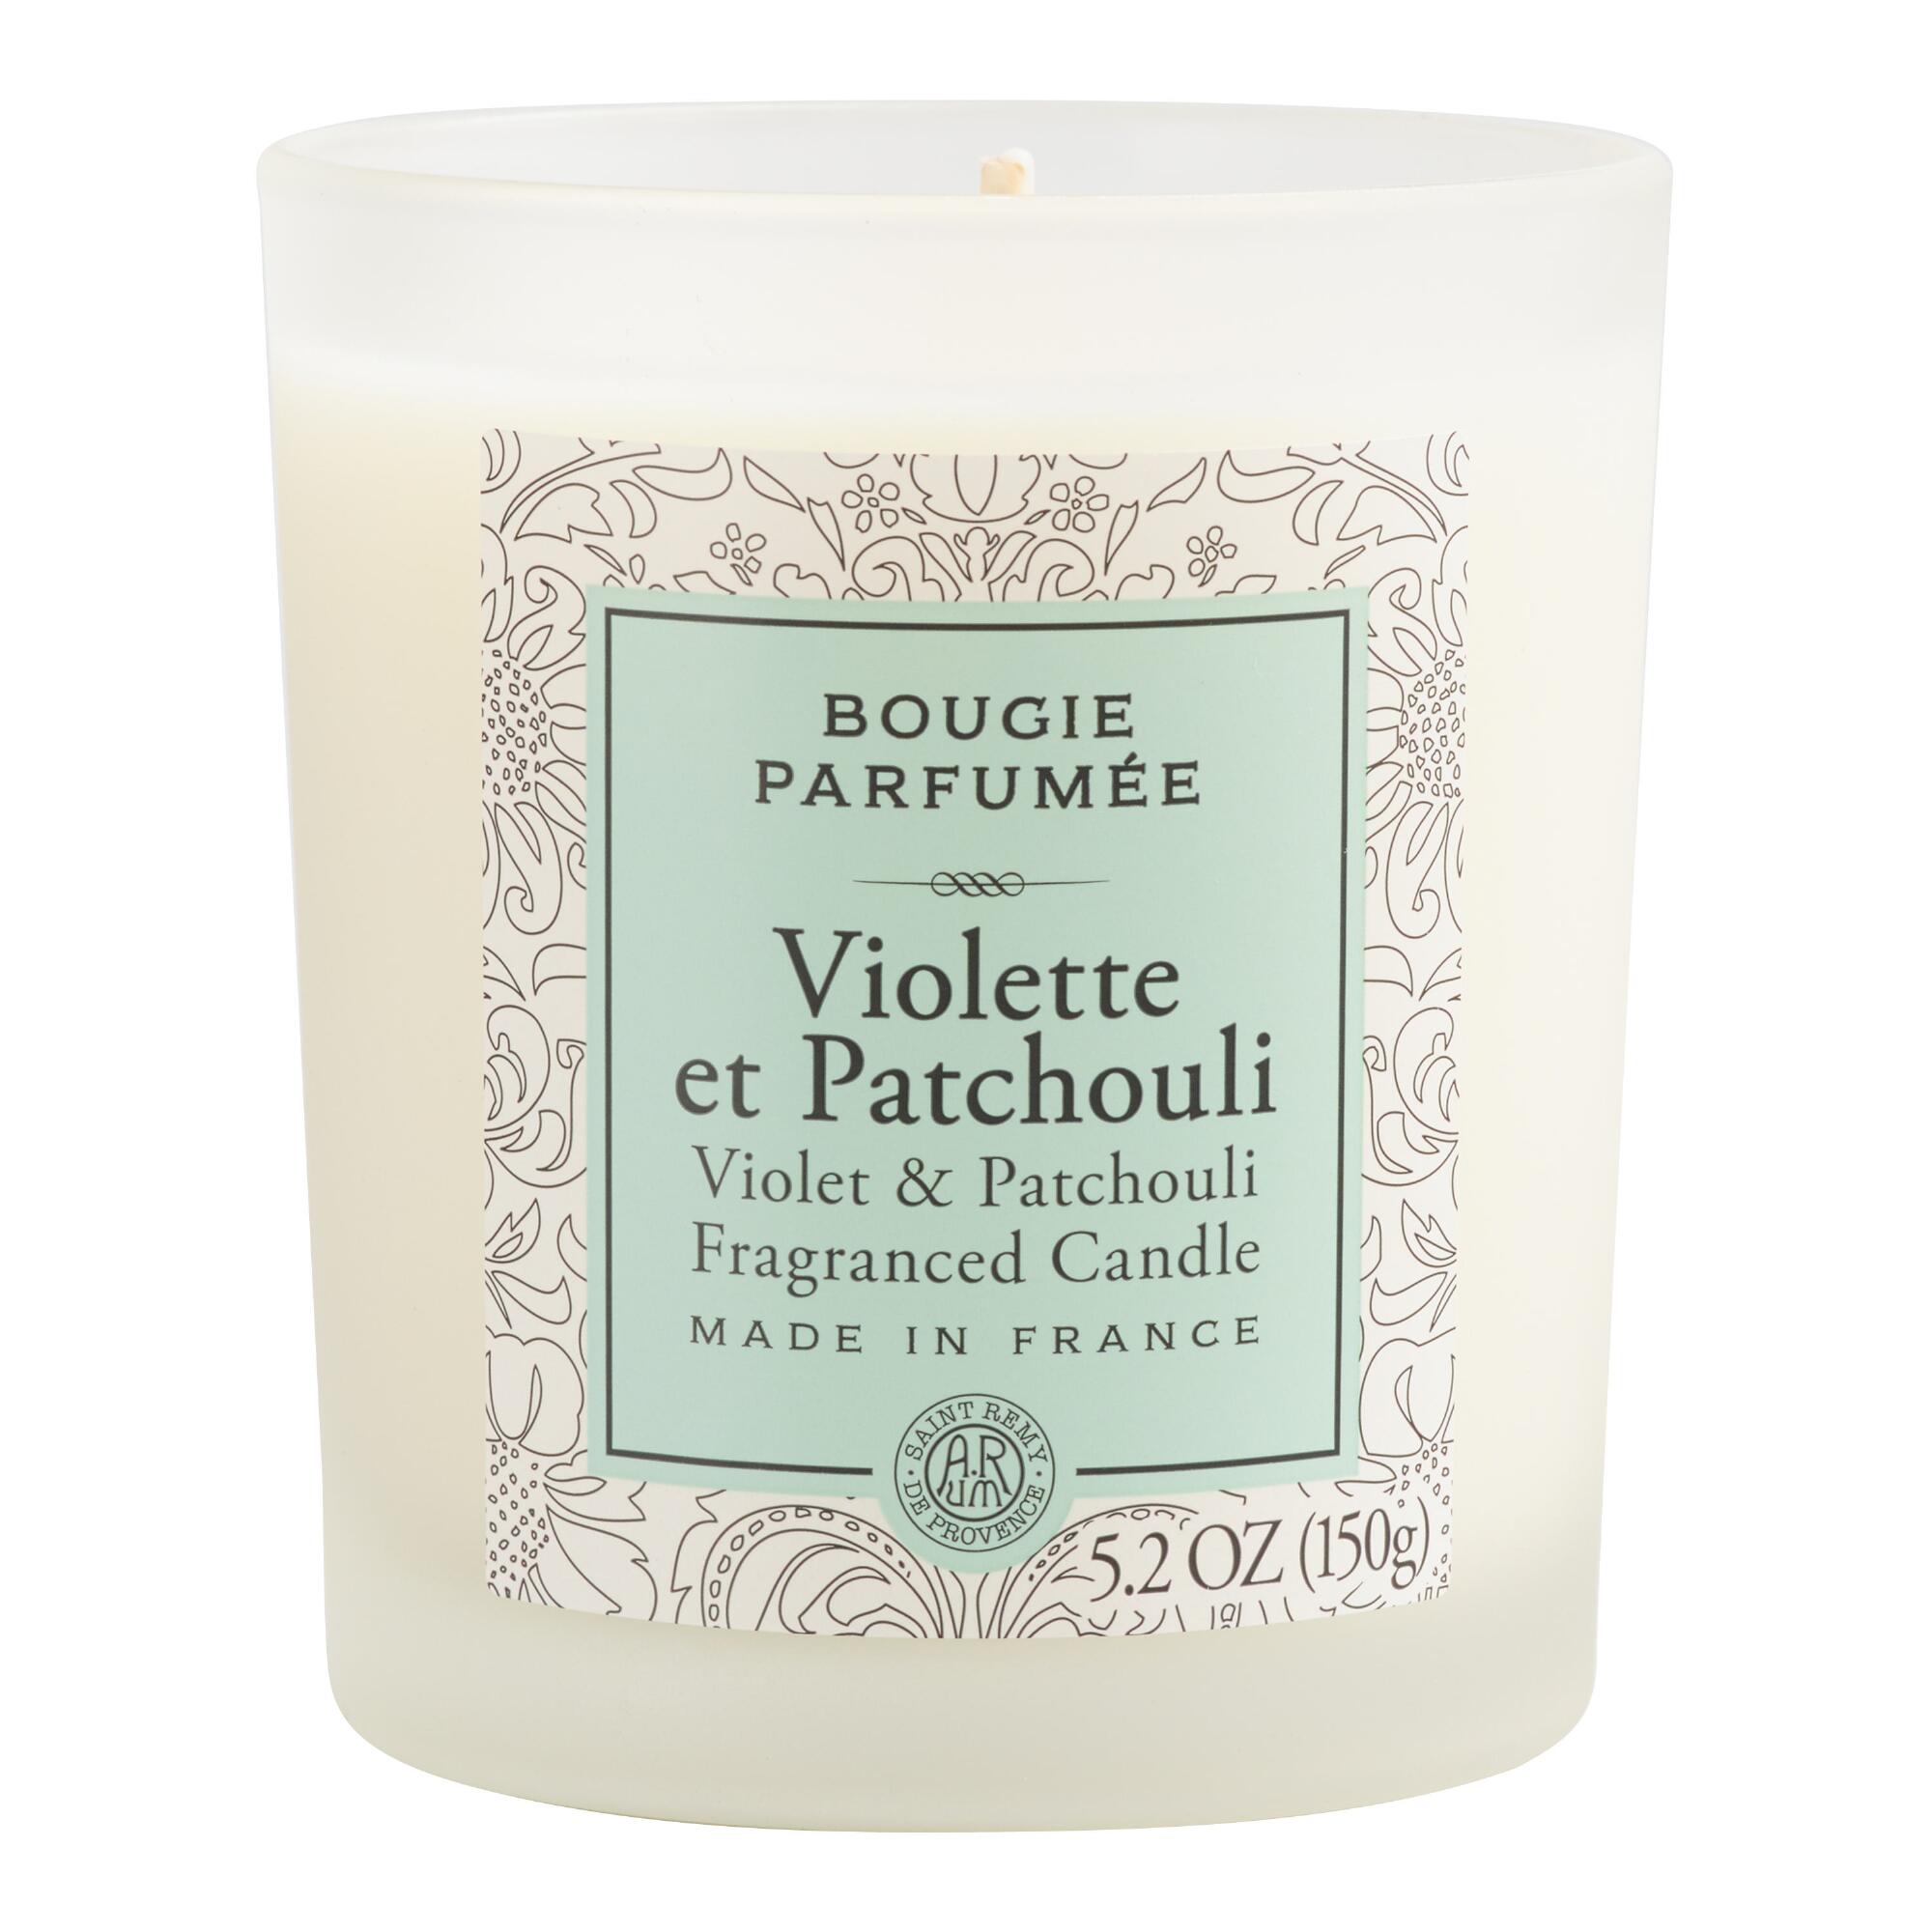 Violet & Patchouli Bougie Parfumee Scented Candle by World Market